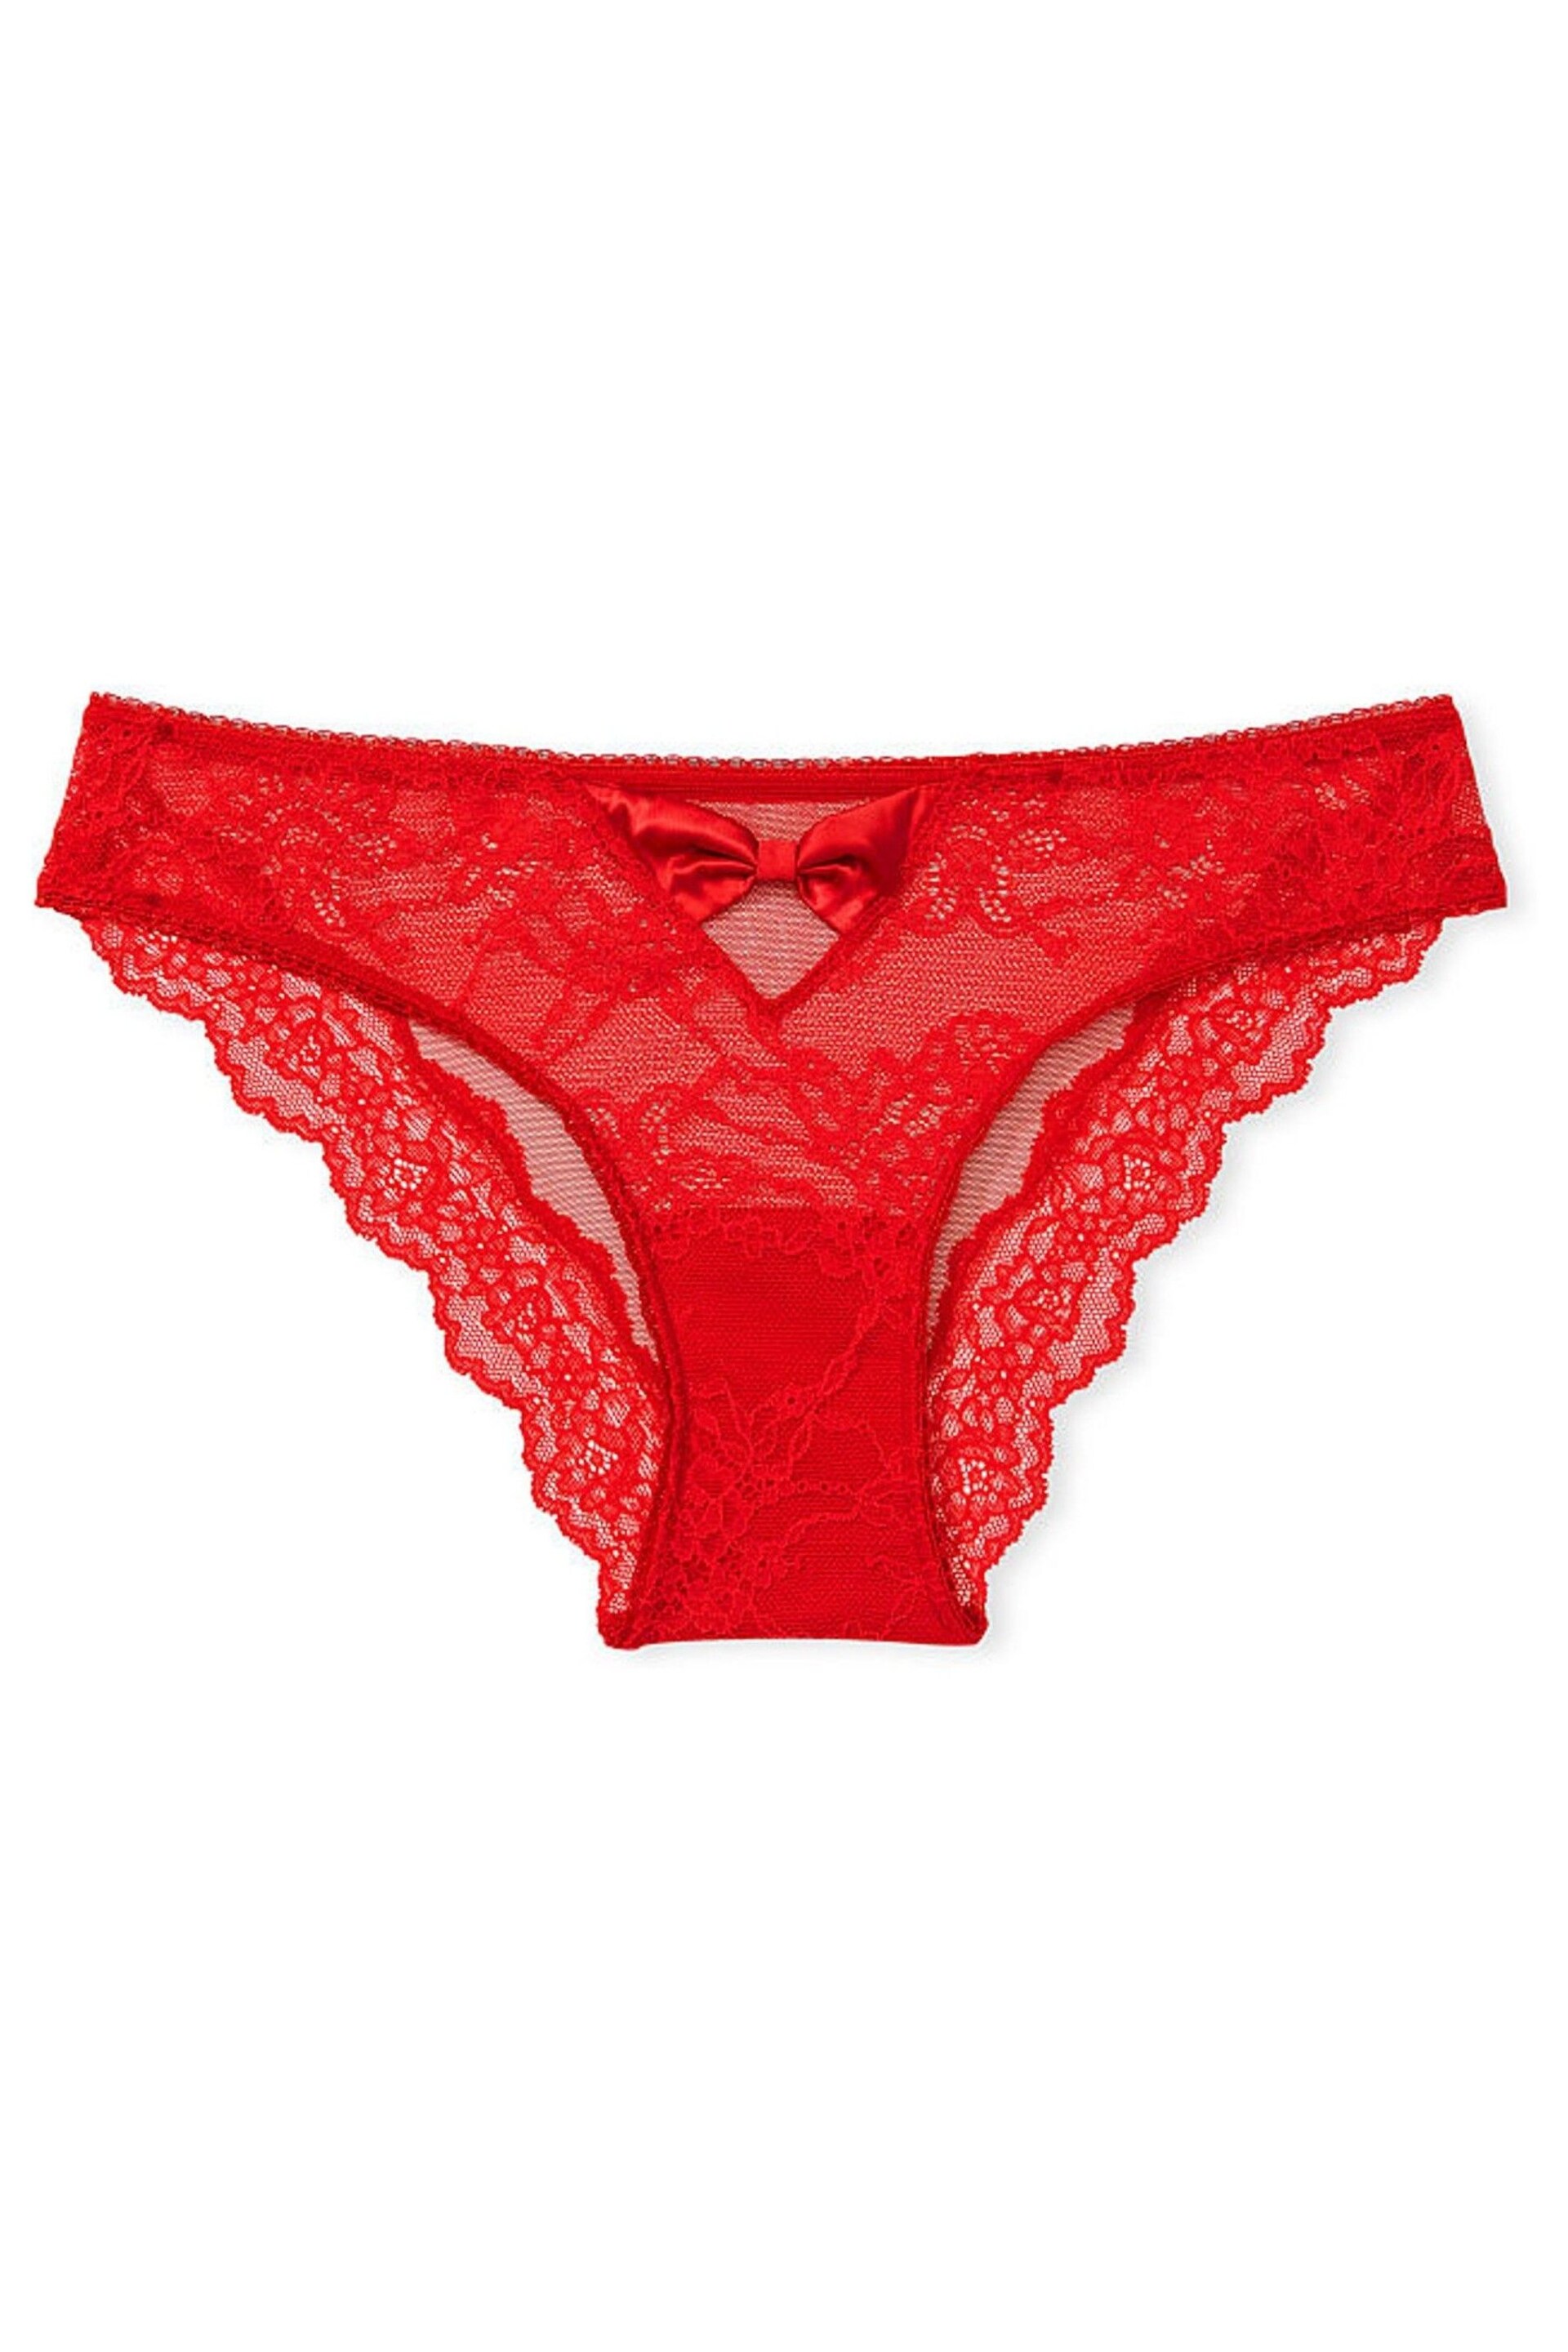 Victoria's Secret Lipstick Red Cheeky Lace Knickers - Image 3 of 3